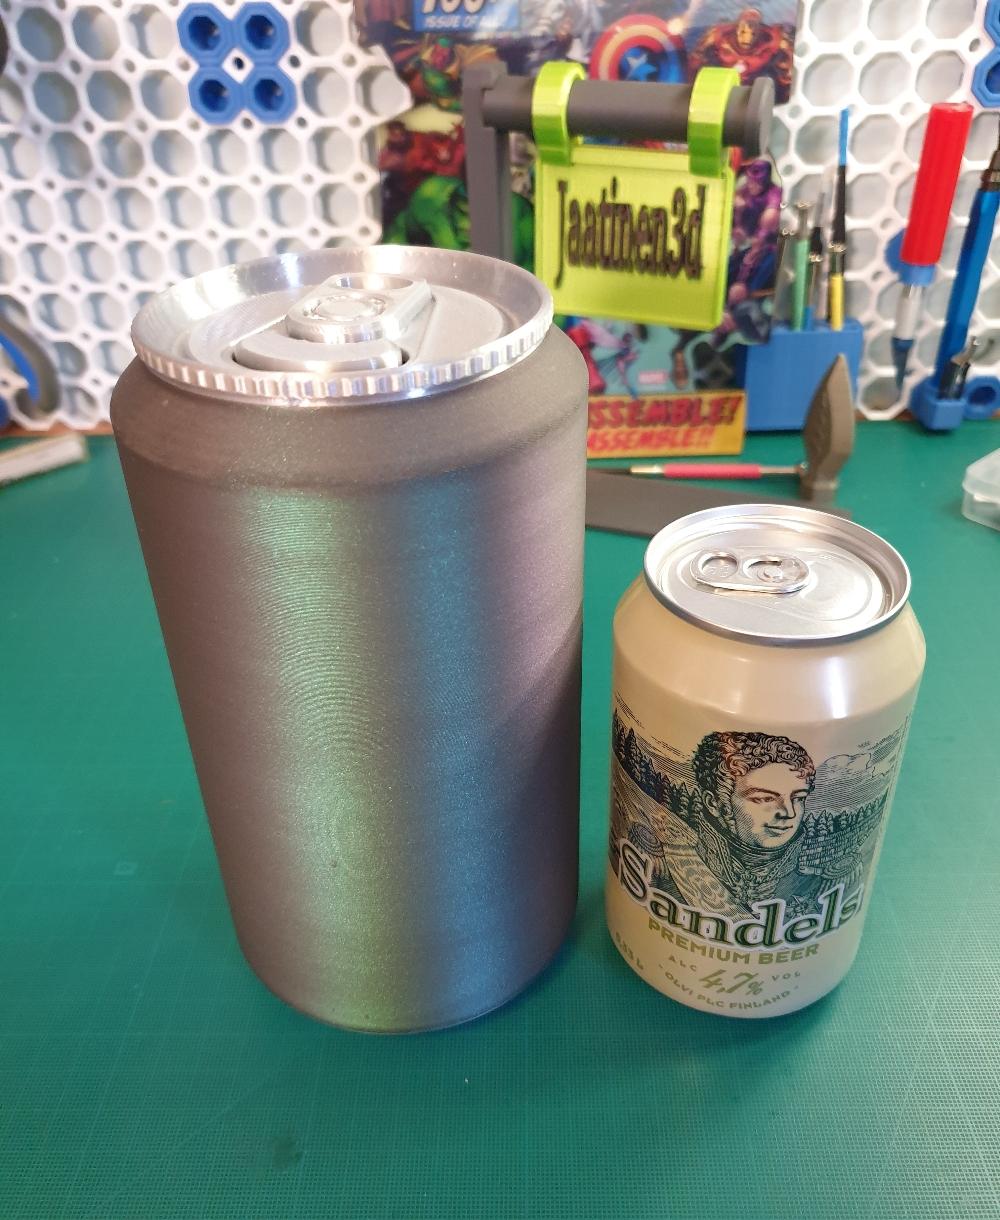 StashCan - Secret Can Safe - I scaled it up to 140% to fit a real can inside as a gift for a friend! I had to scale the retaining rings 200% on the z-axis though, otherwise the mechanism was too loose to lock the rotating clip. - 3d model